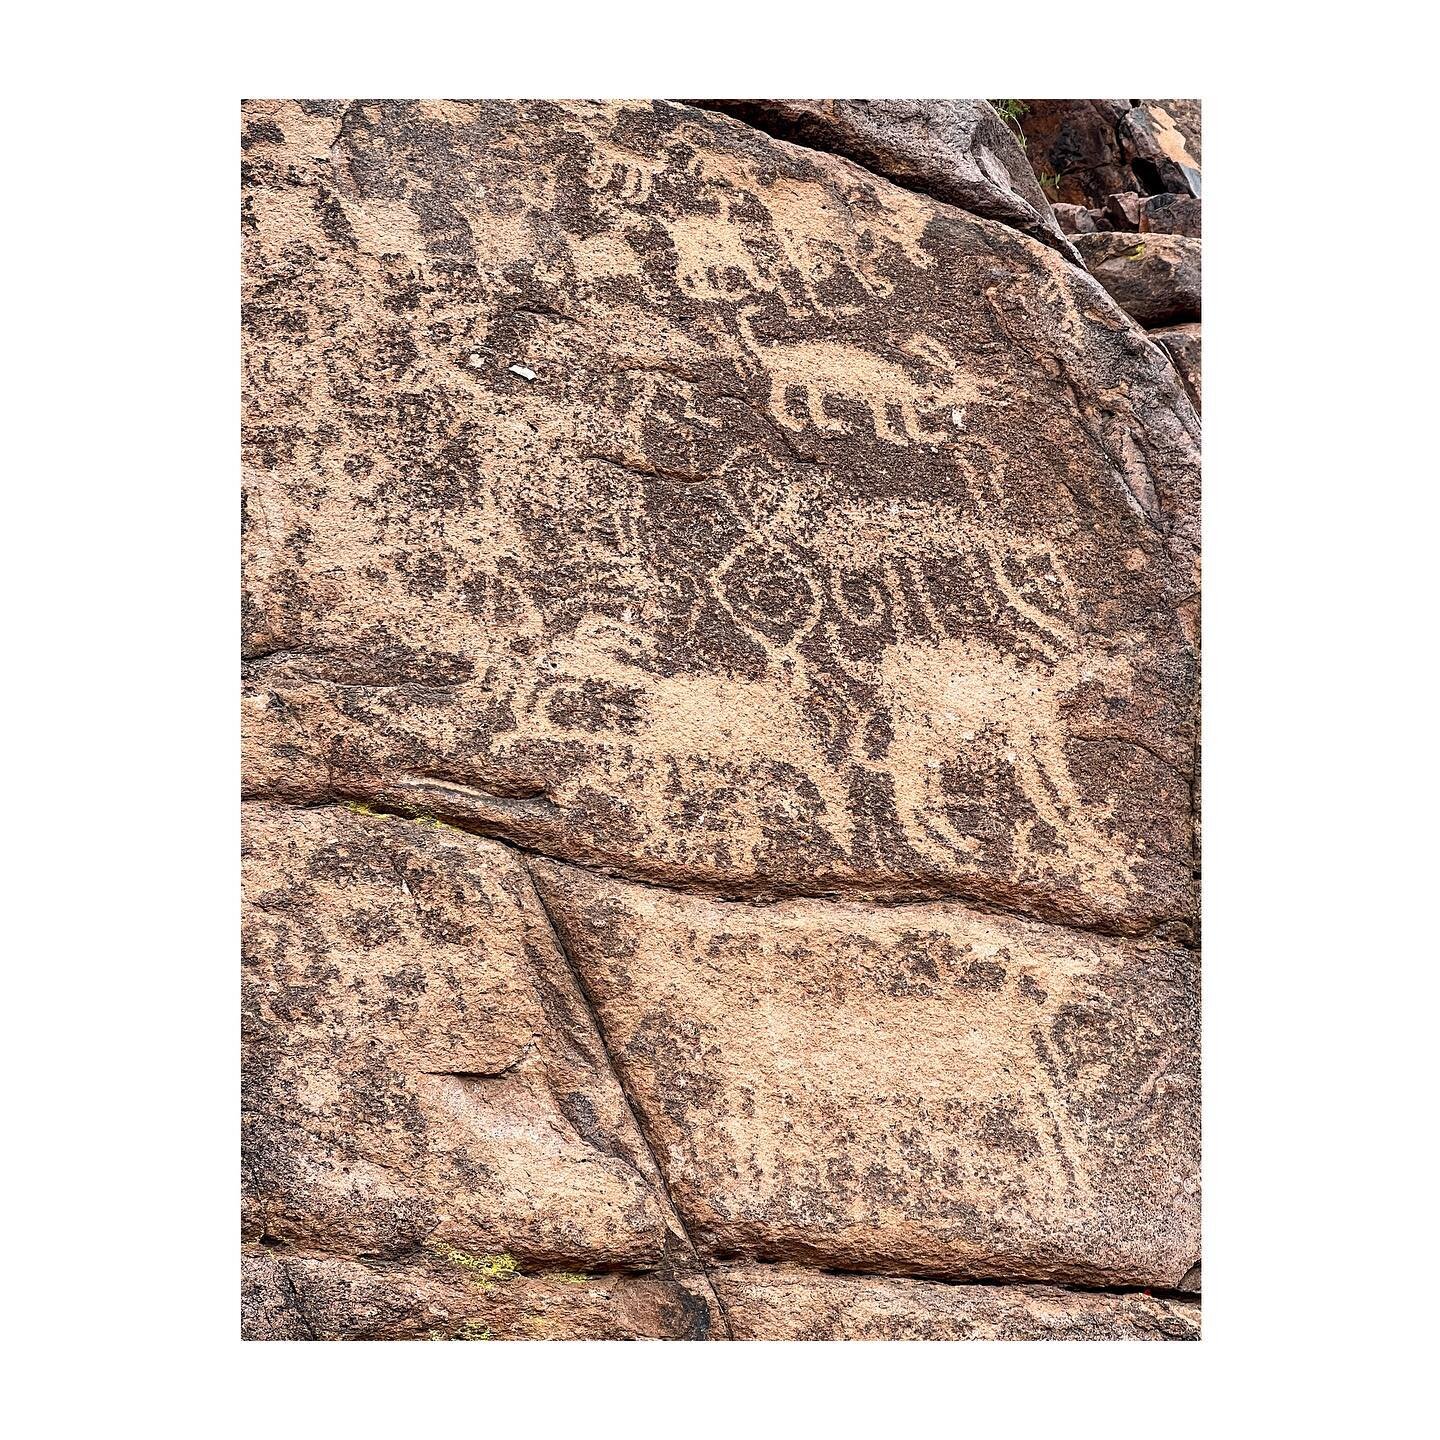 &bull;
&bull;
what a pleasure to know 
that things much more ancient and sacred than myself exist
&bull;
.
.
Hieroglyphics of the HoHokum Indigenous peoples of the desert lands we now call the Superstition Wilderness. 

The Hohokam lived in the Phoen